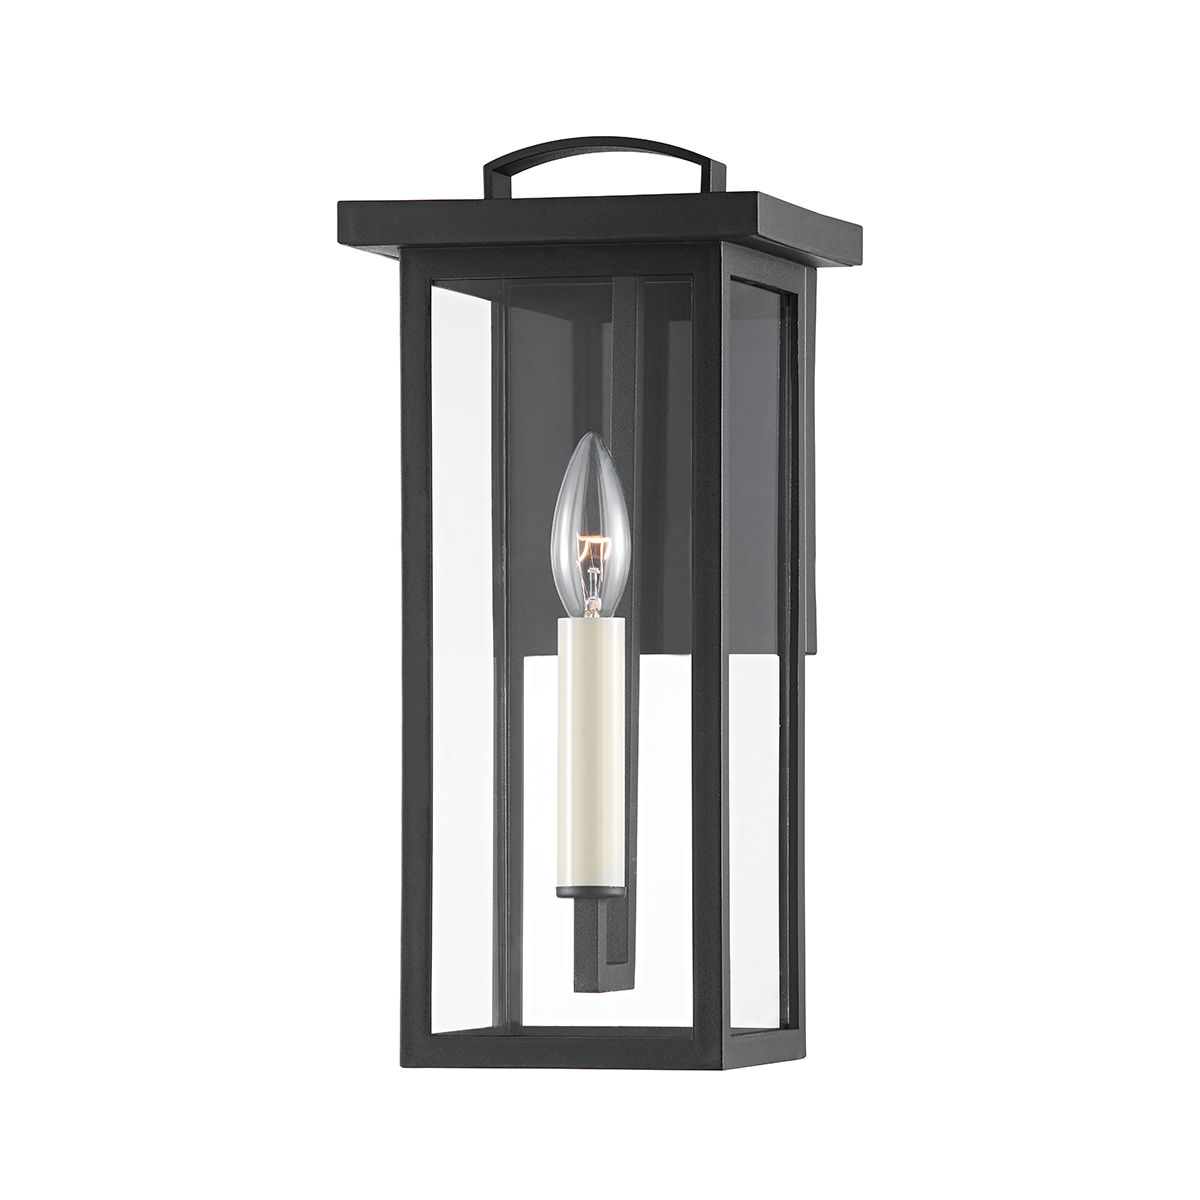 Troy EDEN 1 LIGHT SMALL EXTERIOR WALL SCONCE B7521 Outdoor l Wall Troy Lighting TEXTURE BLACK  